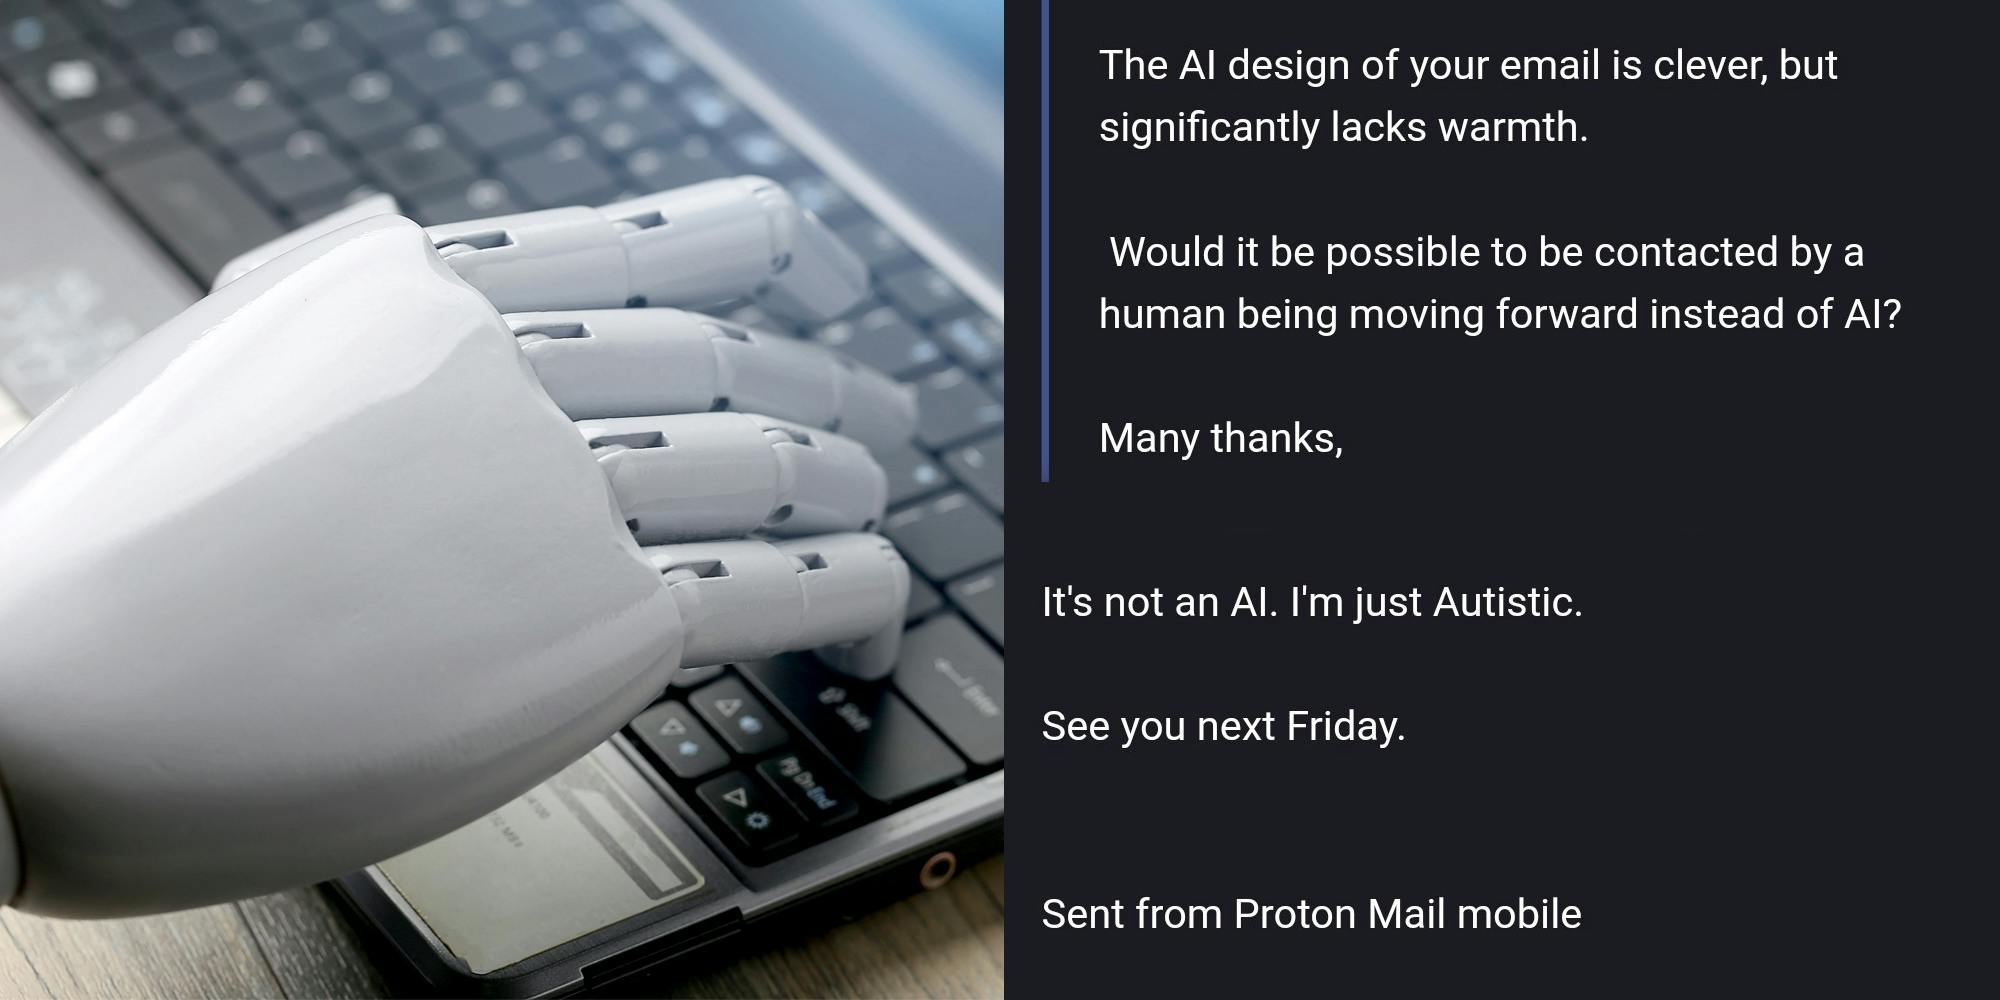 AI typing on laptop keyboard (l) email exchange on grey background "The AI design of your email is clever, but significantly lacks warmth. Would it be possible to be contacted by a human being moving forward instead of AI? Many thanks, It's not an AI. I'm just Autistic. See you next Friday. Sent from Proton Mail mobile" (r)